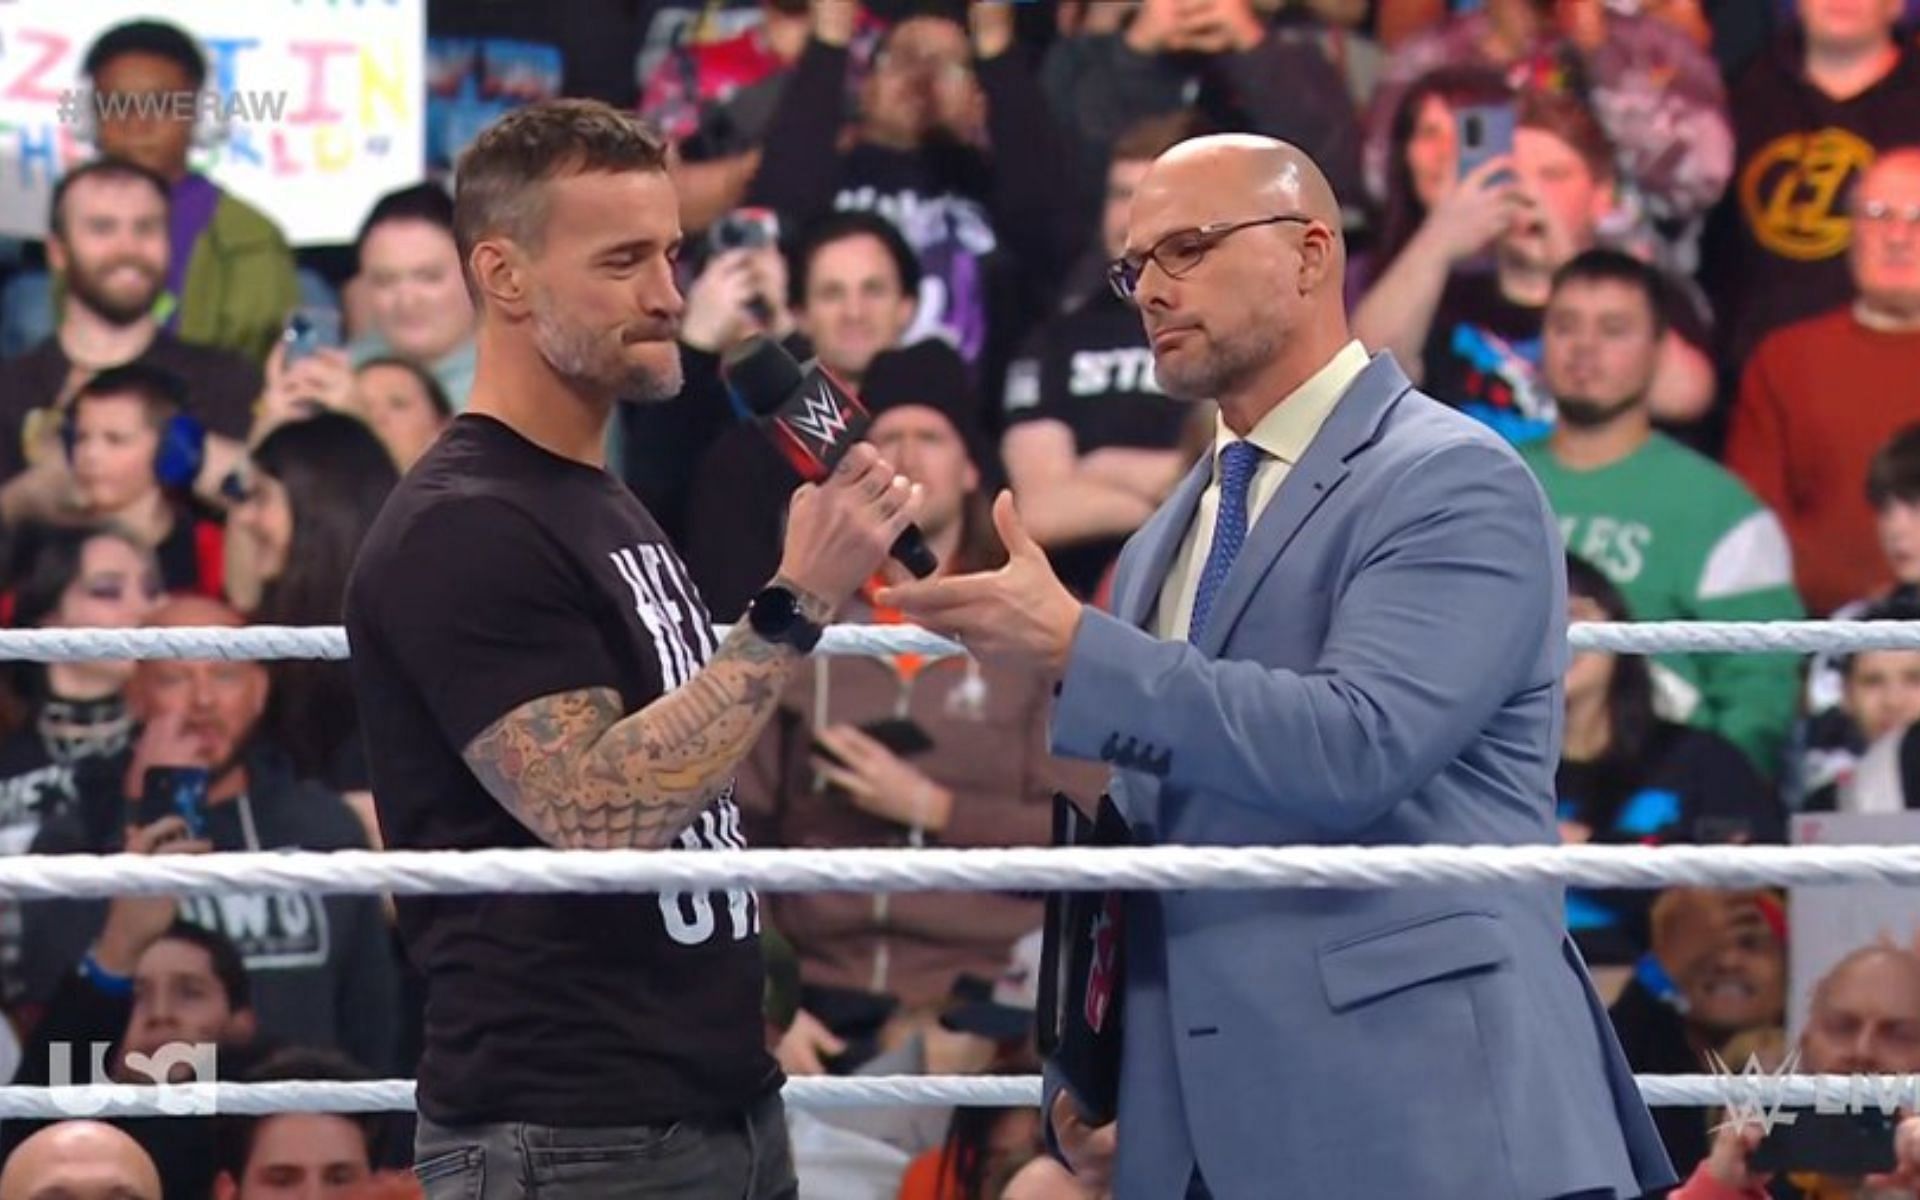 All eyes have been on Punk - especially backstage on RAW